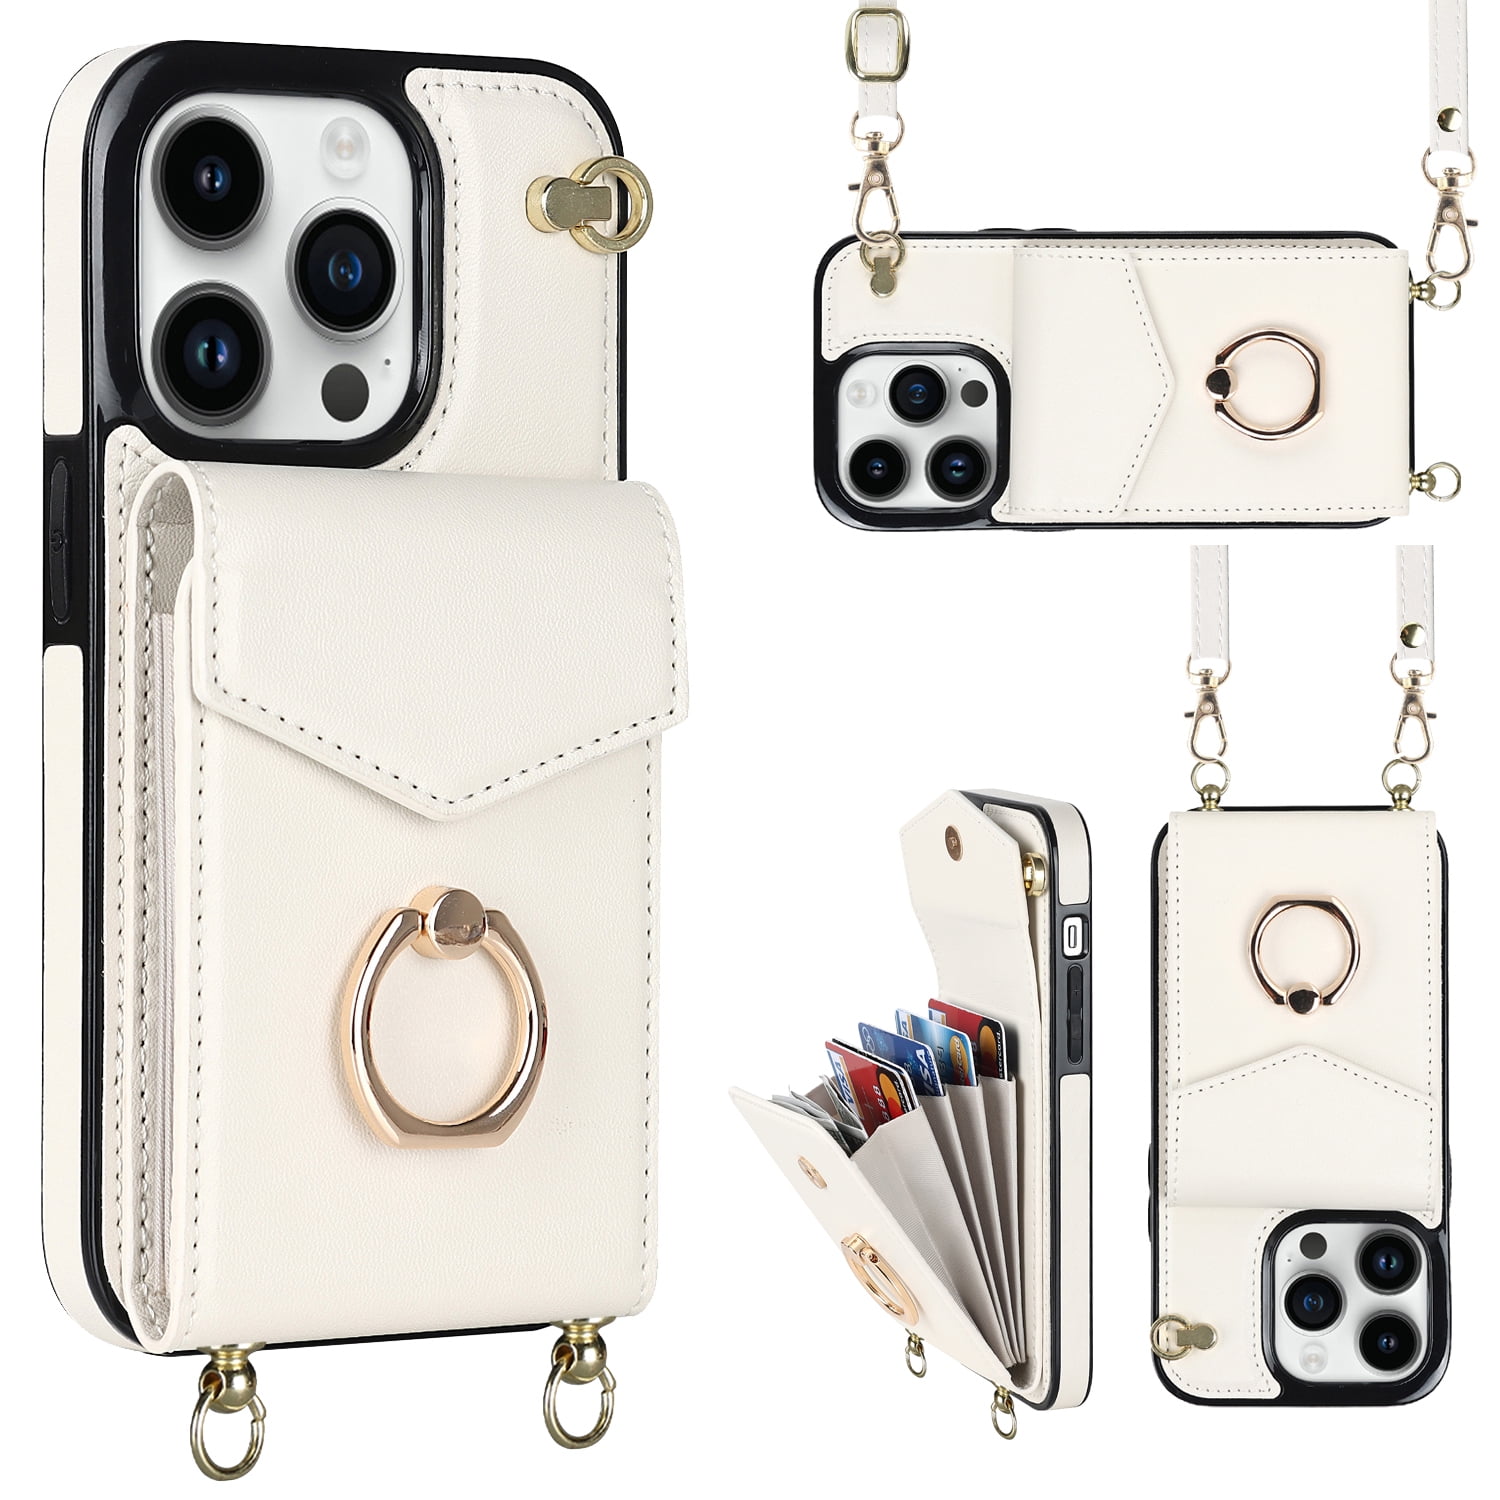 Nalacover Wallet Case for iPhone 11 Pro Max, PU Leather Shoulder Strap  Lanyard Crossbody Back Card Slot Bag Magnetic Cover with RFID Blocking Ring  Holder Kickstand Soft TPU Bumper Case,White 